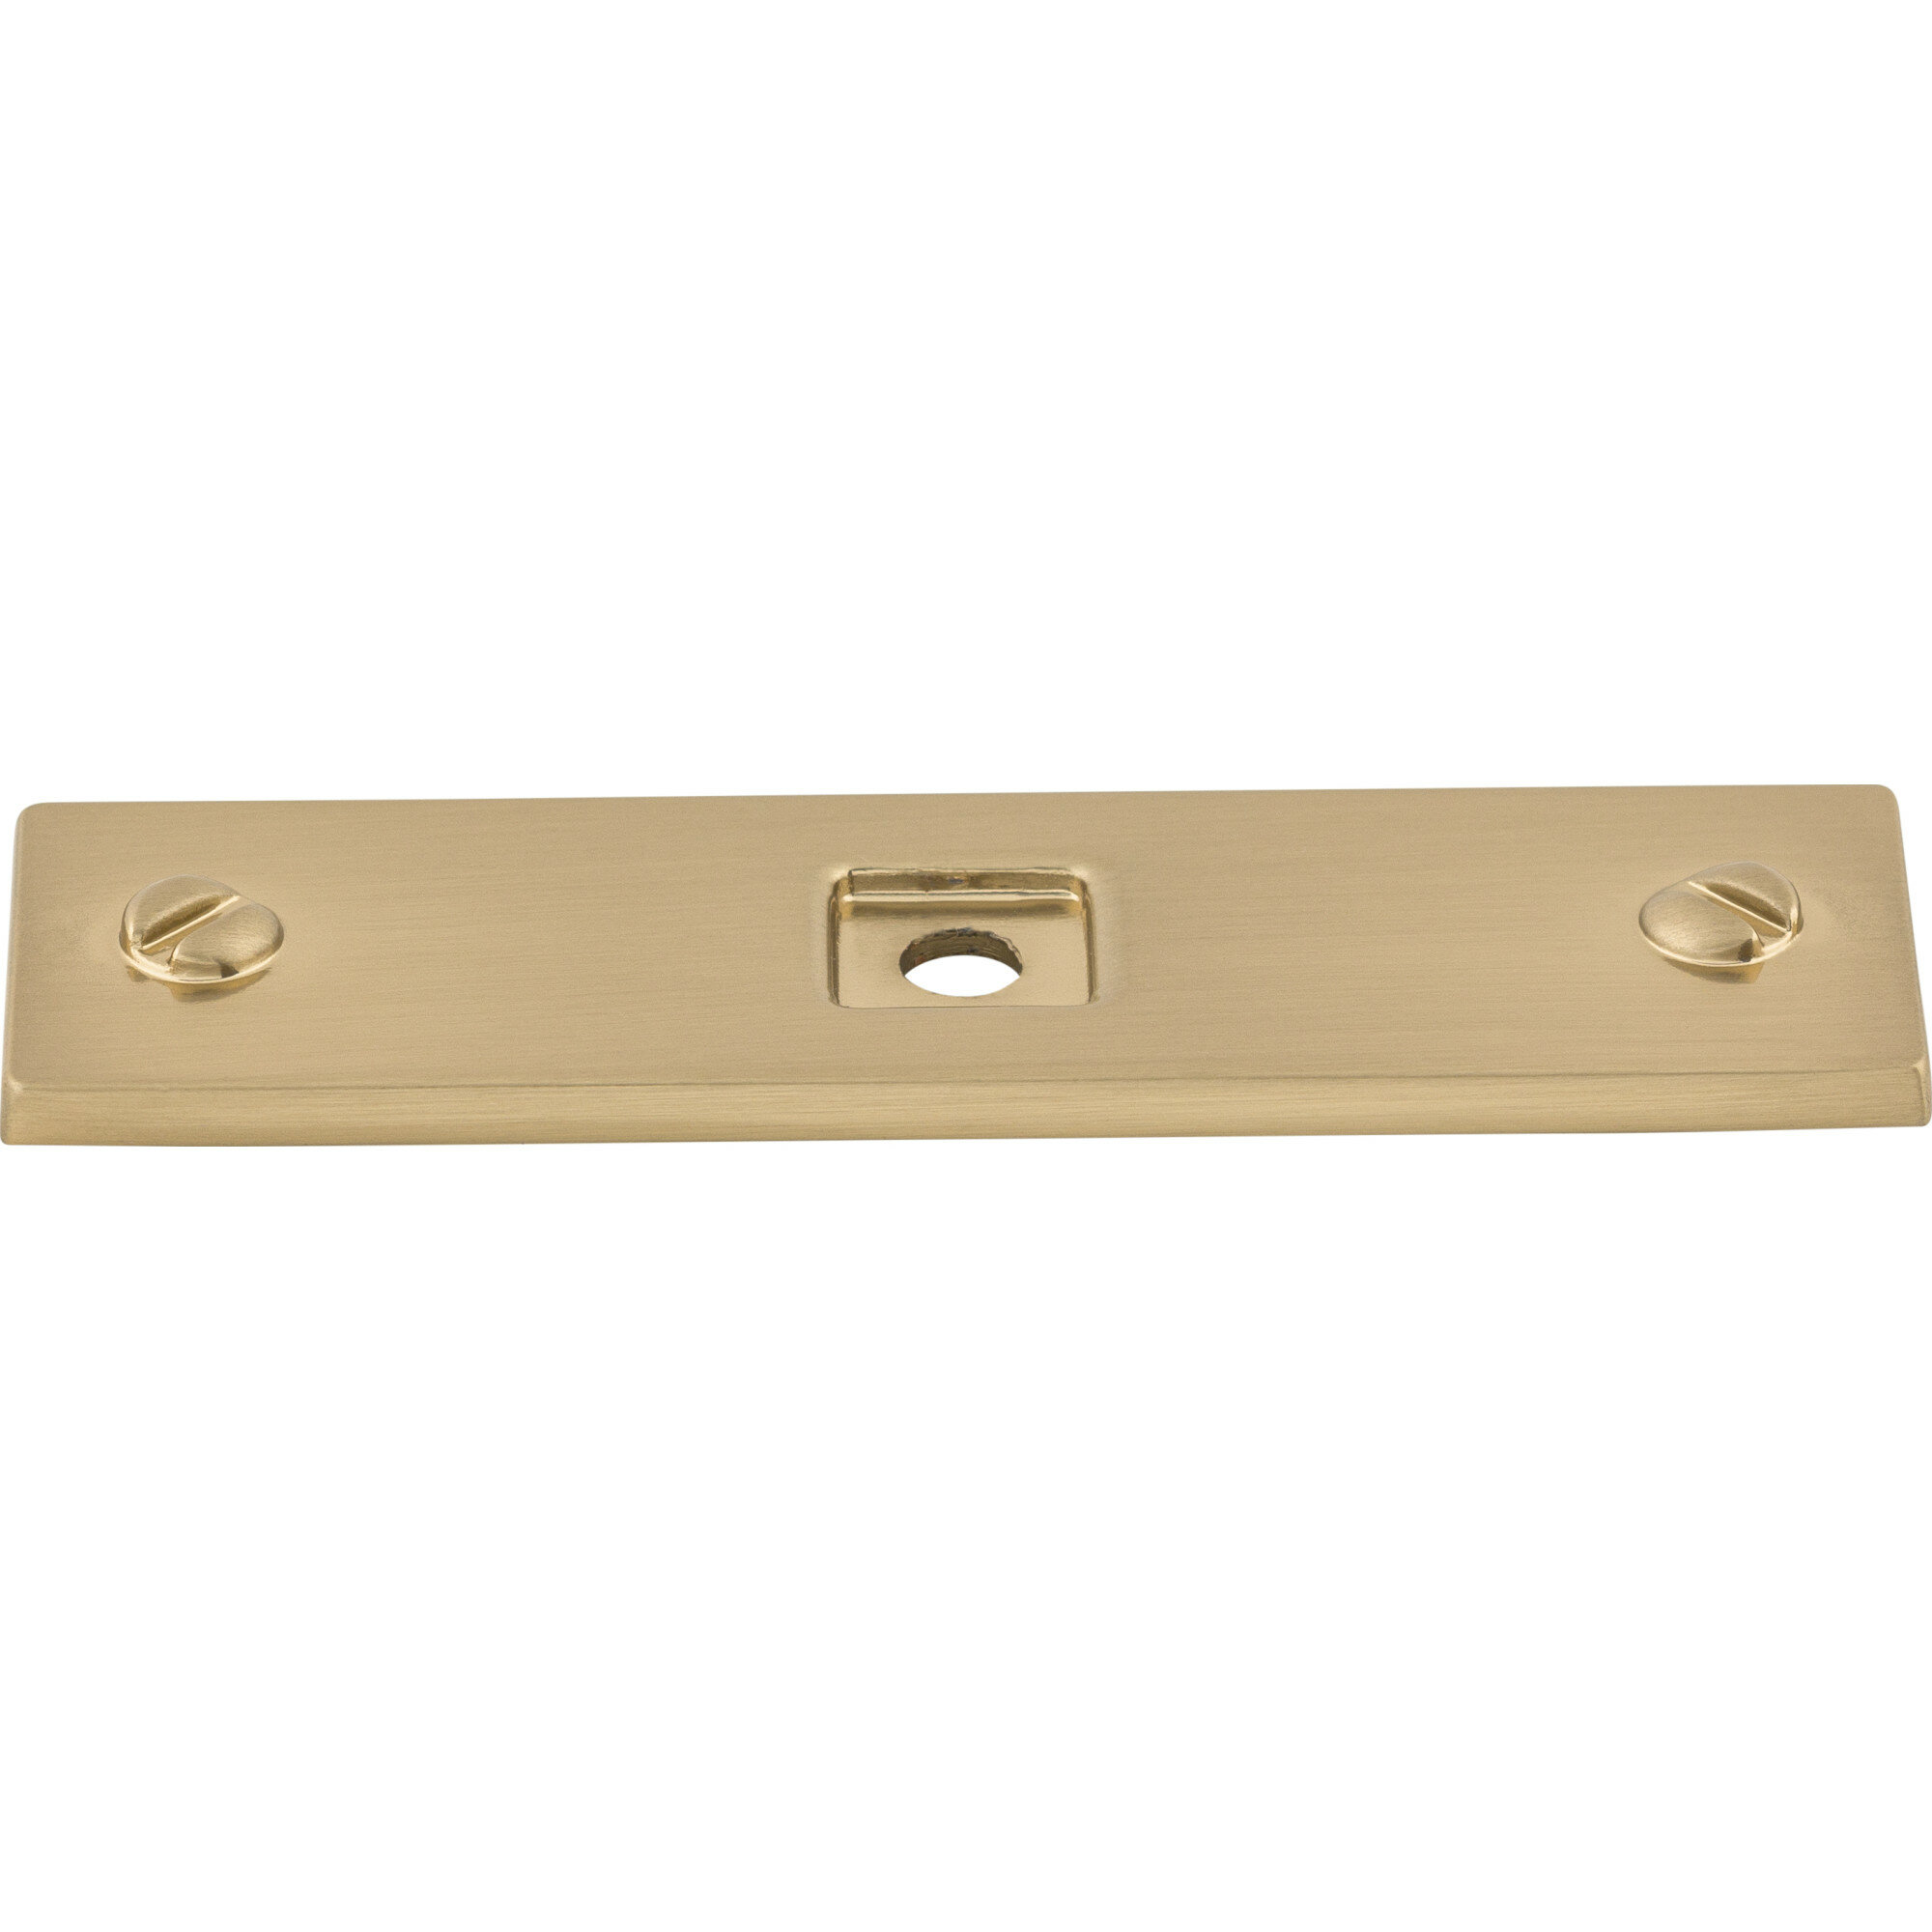 Top Knobs Channing Knob Backplate Reviews Wayfair